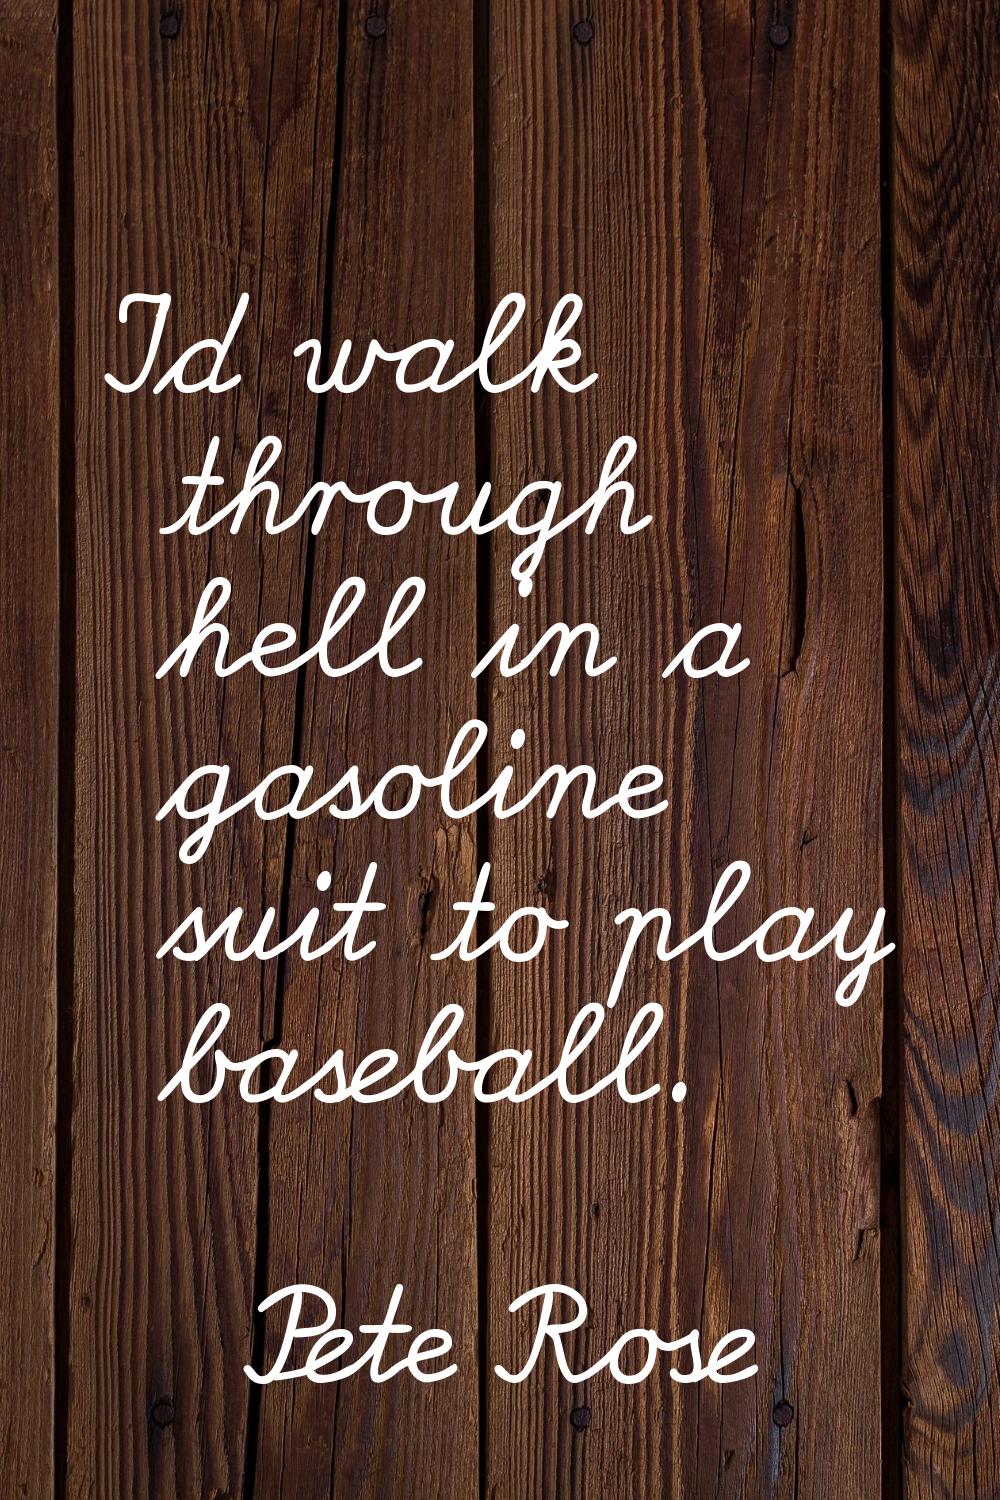 I'd walk through hell in a gasoline suit to play baseball.